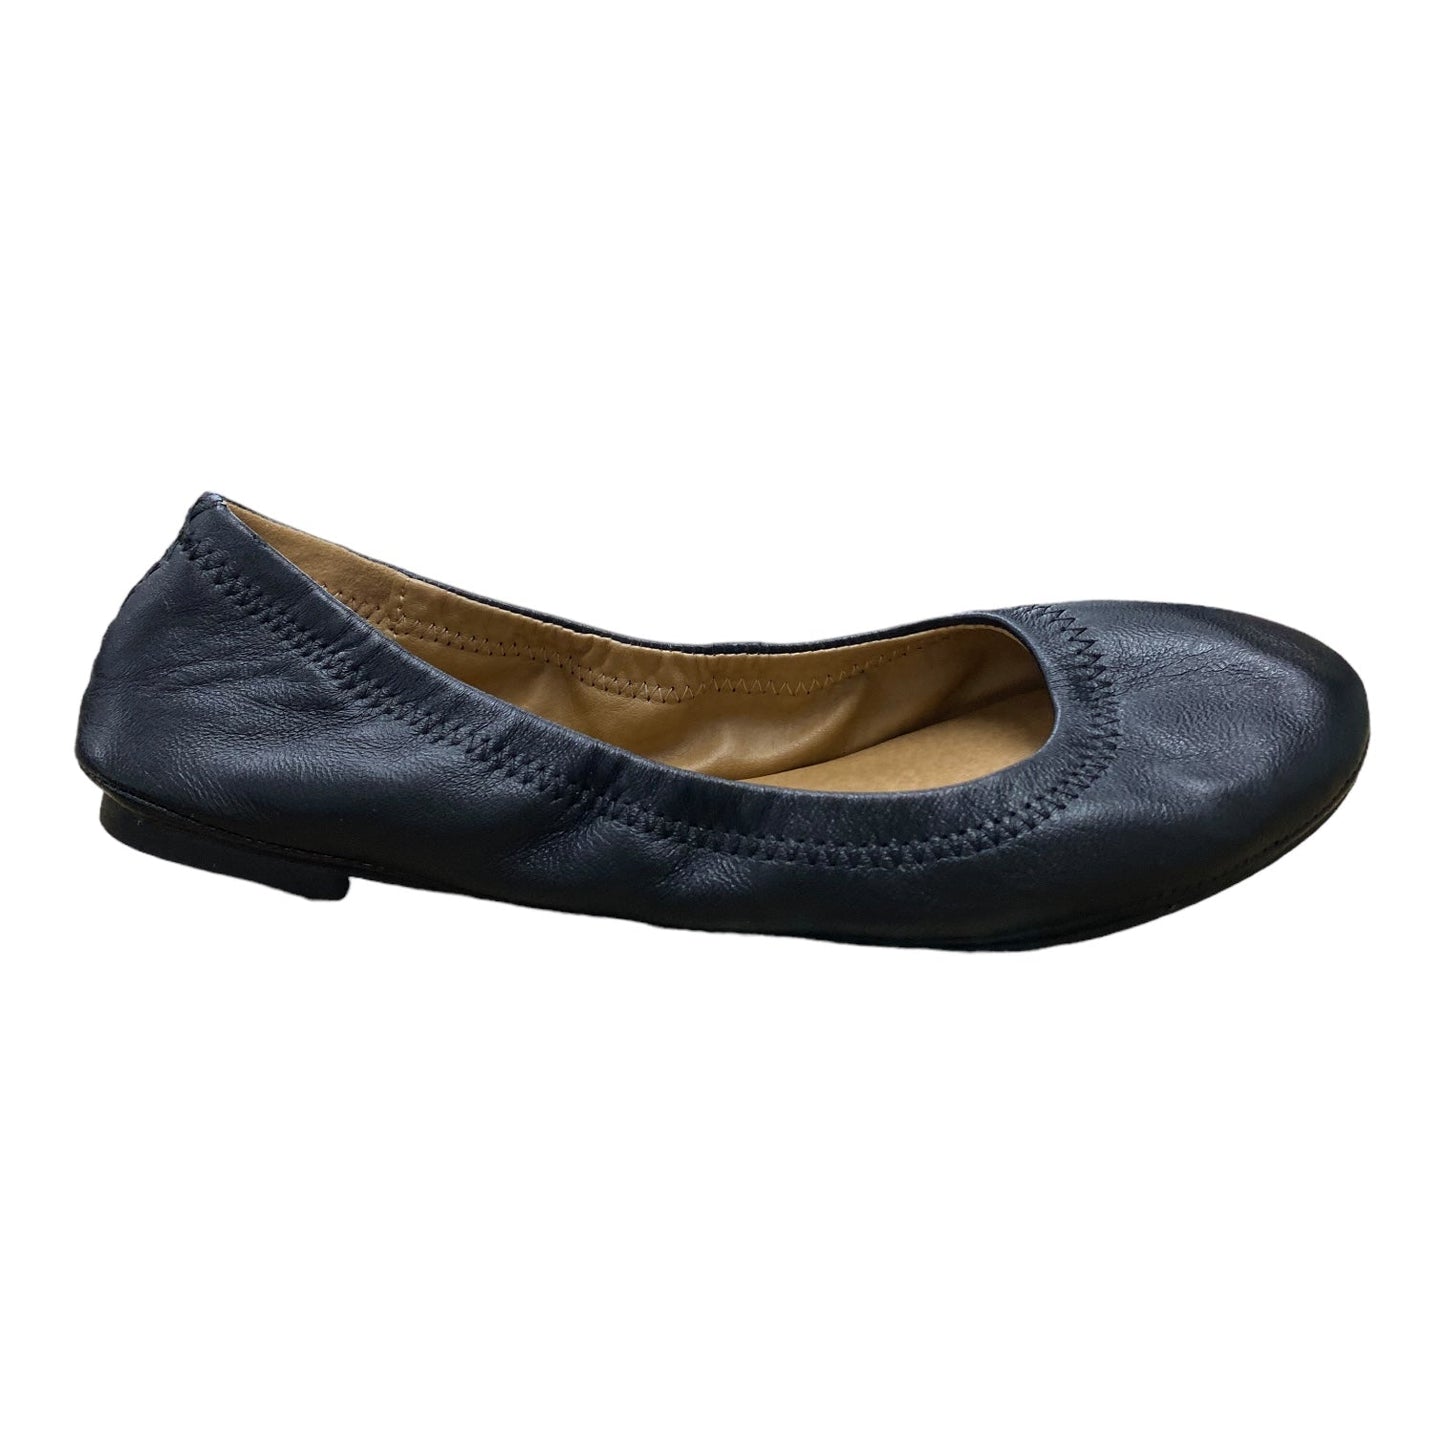 Black Shoes Flats Lucky Brand, Size 7.5